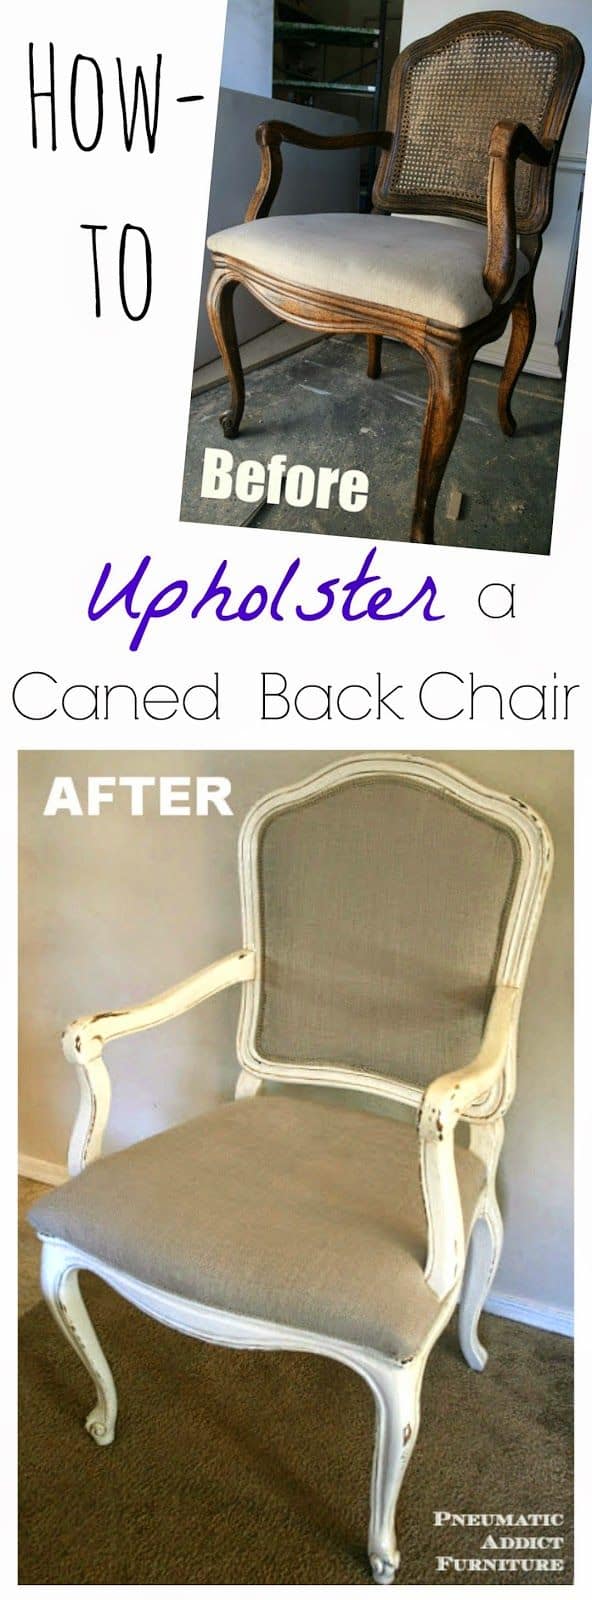 #7 upholstering a caned back chair